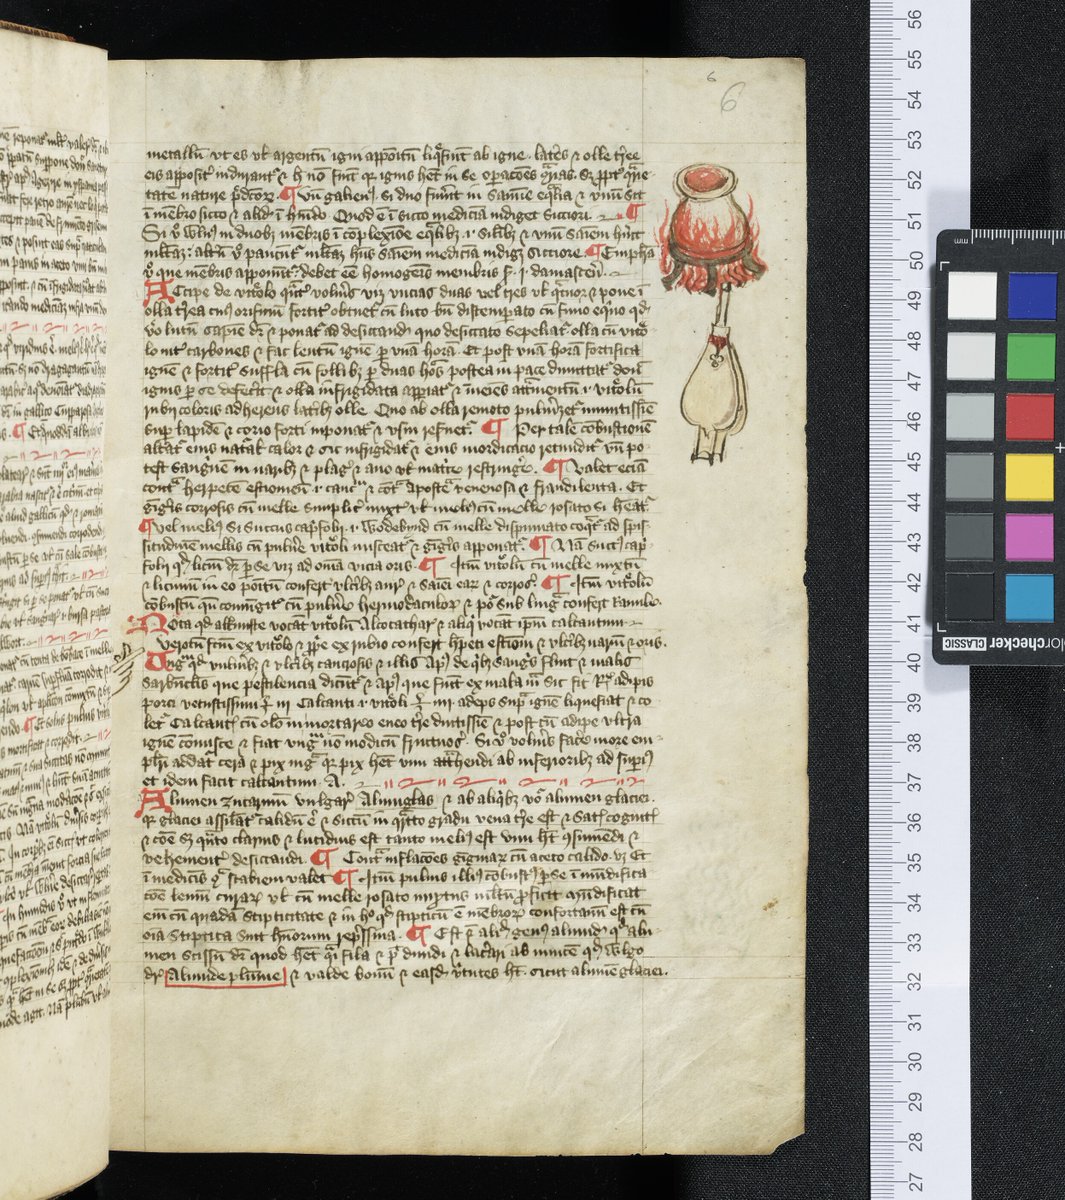 MS 86 is now available online. This manuscript contains works by John Arderne (1307–1392), an important English surgeon. (Pictured: Fols. 5v and 6r) You can view in here: digital.bodleian.ox.ac.uk/objects/b9afb8…